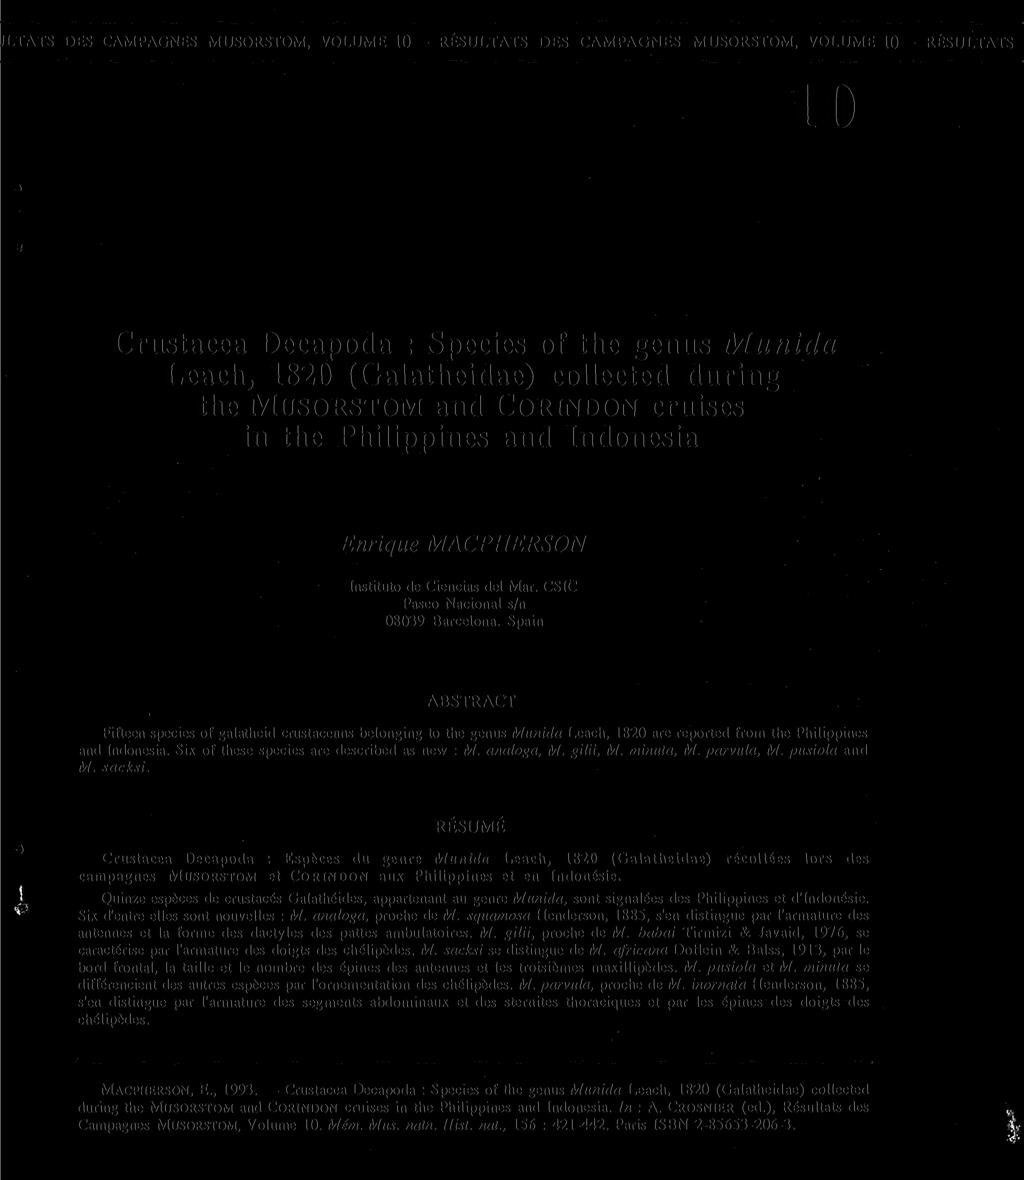 JLTATS DES CAMPAGNES MUSORSTOM, VOLUME 10 RESULTATS DES CAMPAGNES MUSORSTOM, VOLUME 10 RESULTATS 10 Crustacea Decapoda : Species of the genus Munida Leach, 1820 (Galatheidae) collected during the